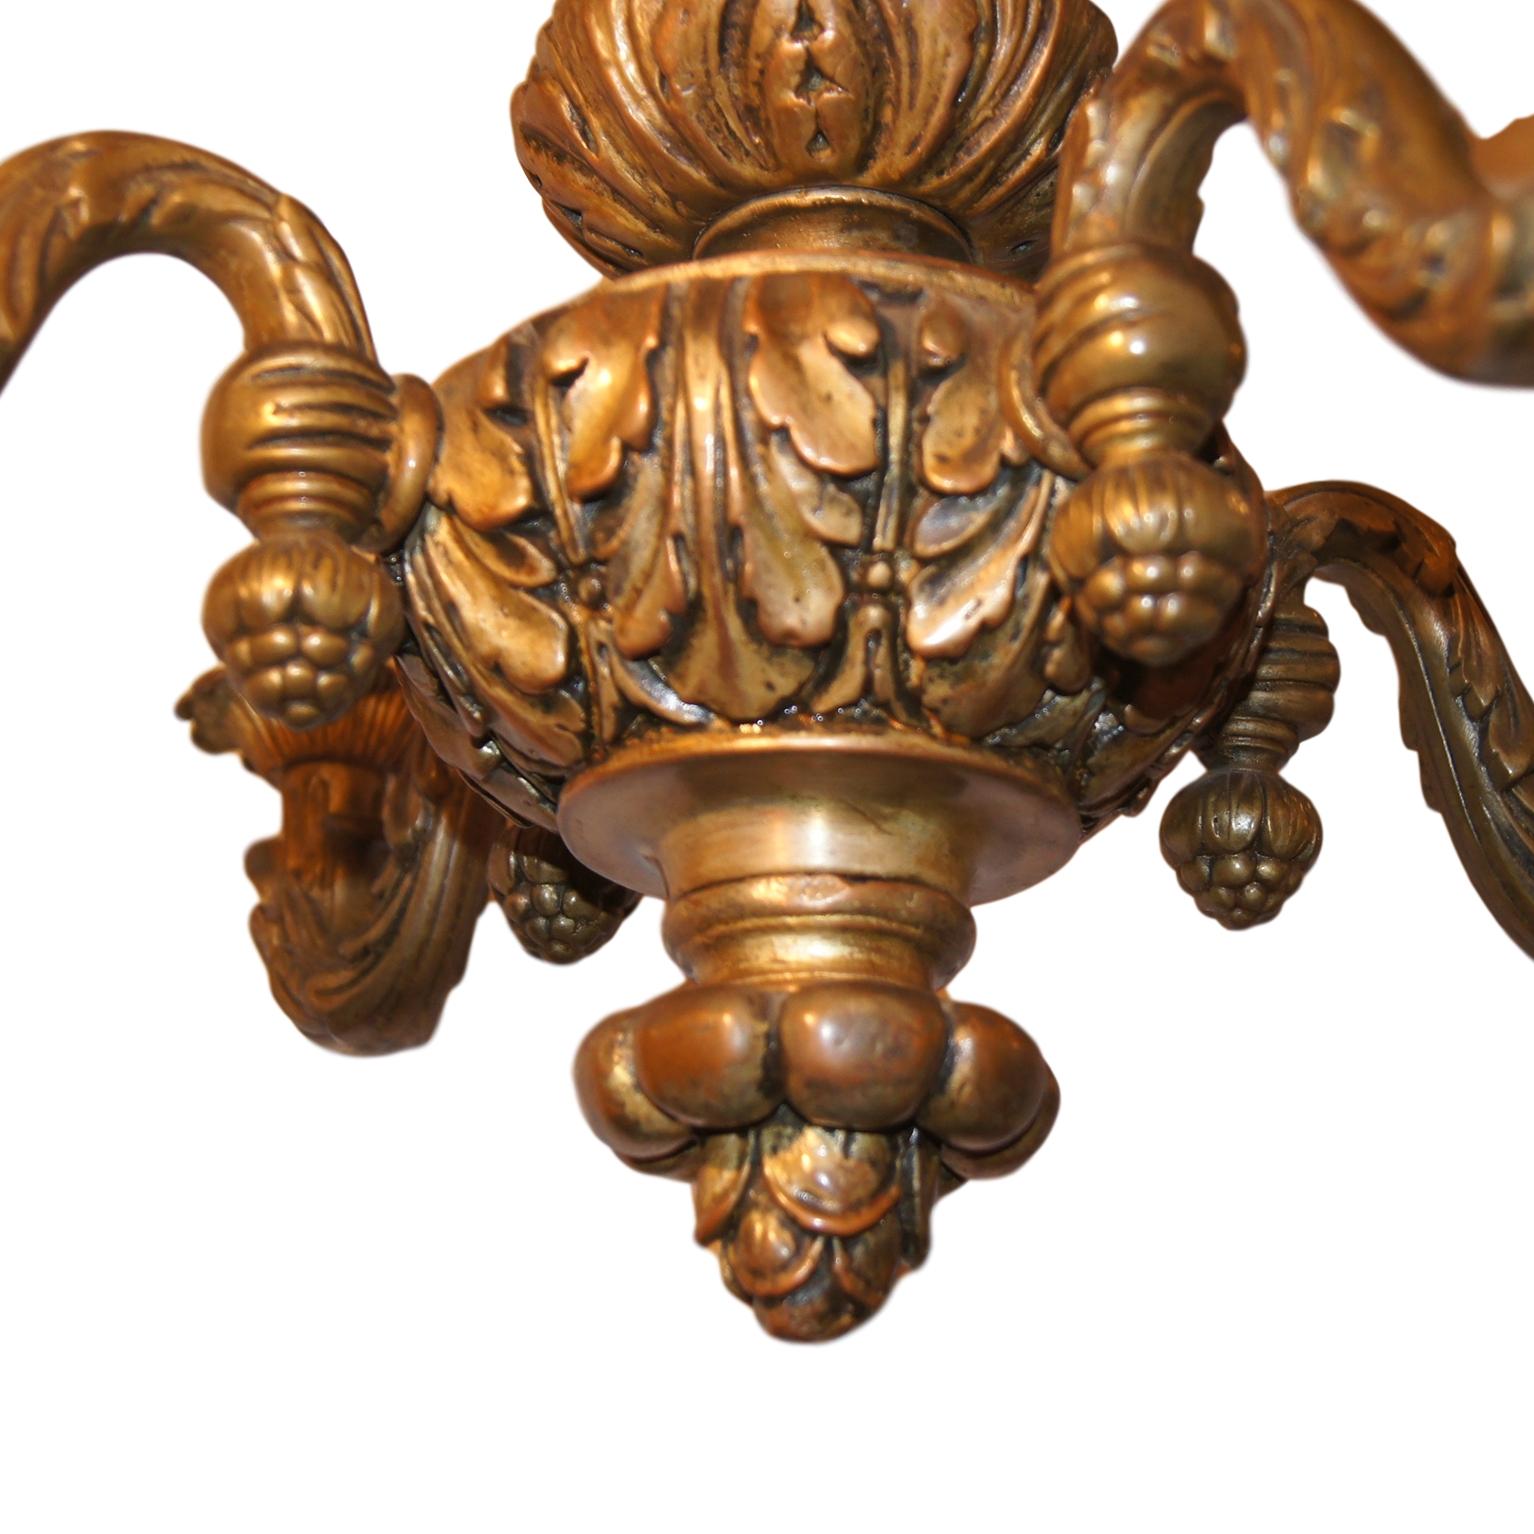 A circa 1920s French gilt plaster and wood neoclassic chandelier with original patina.

Measurements:
Height (adjustable) 29